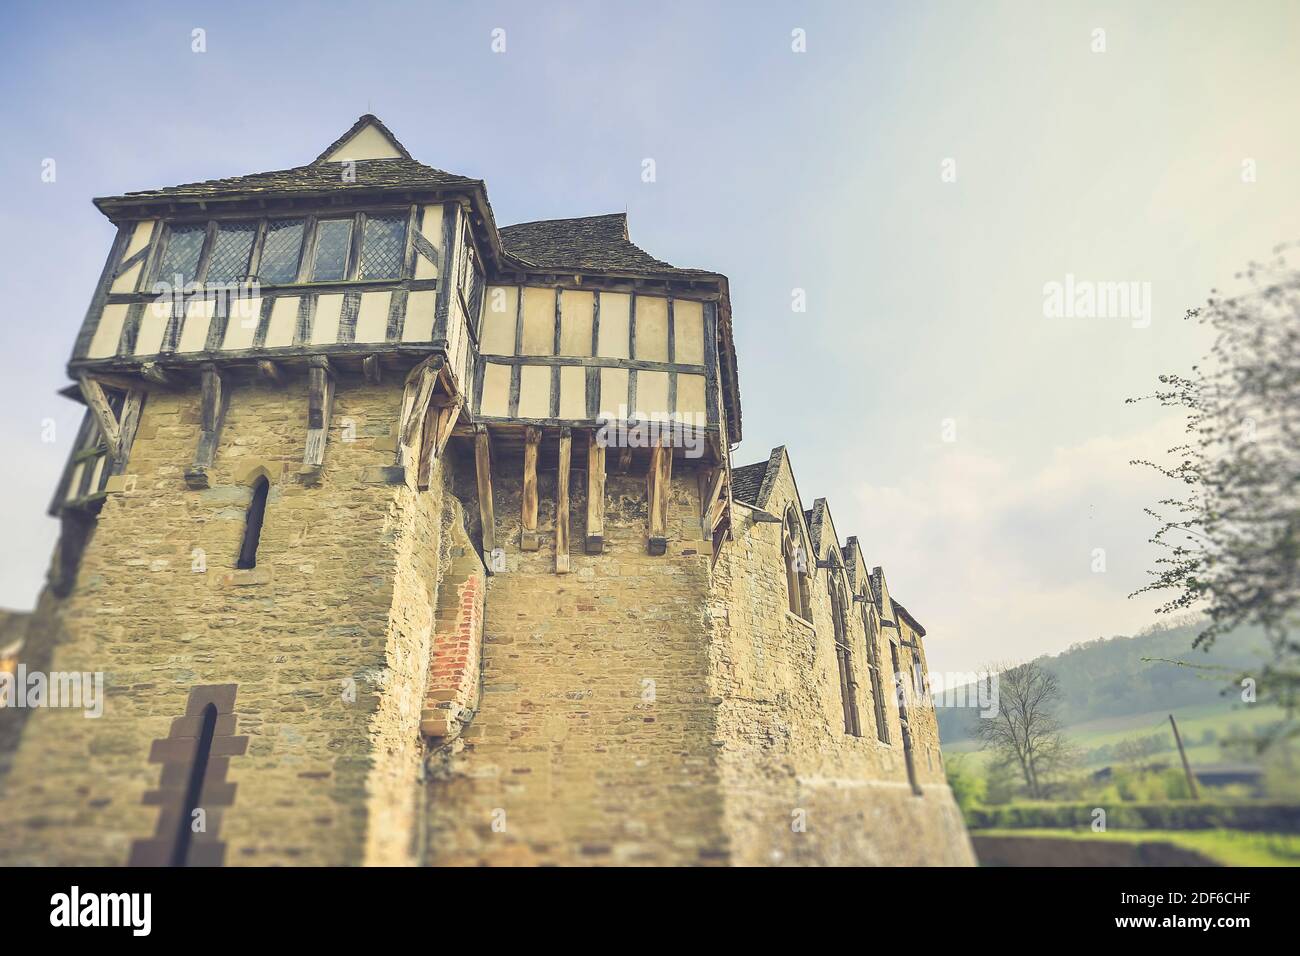 North Tower of Stokesay Castle, a preserved fortified Medieval Manor House near Craven Arms in Shropshire, UK on a sunny spring day. Stock Photo